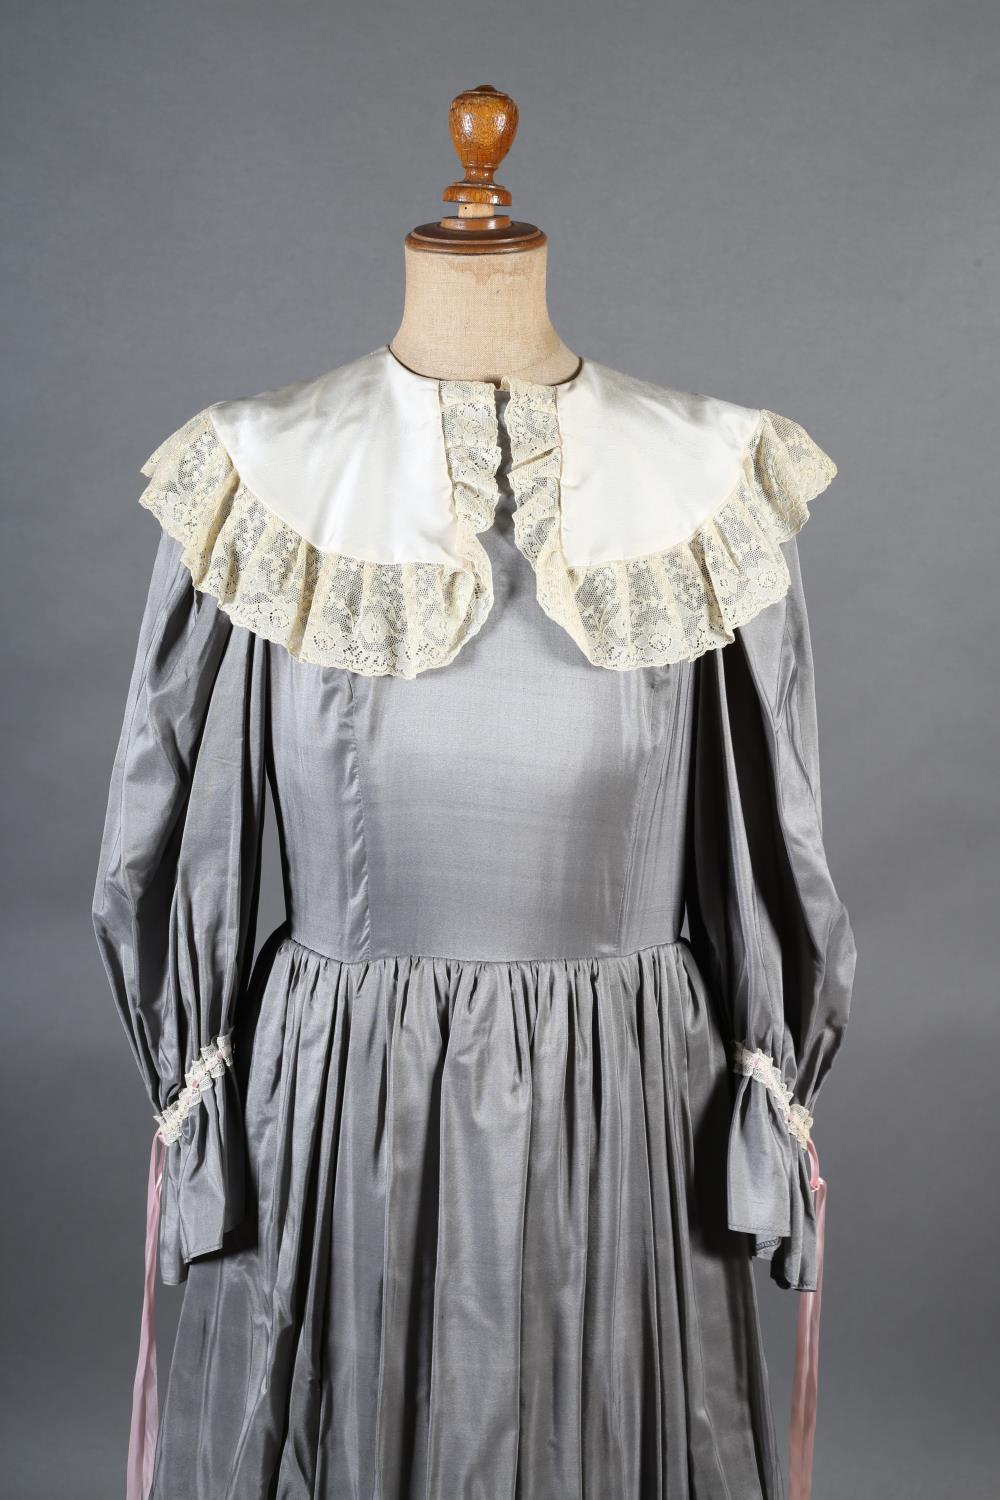 A 1980s Laura Ashley style grey length full dress with lace edged cream collar, lace and ribbon - Image 3 of 5